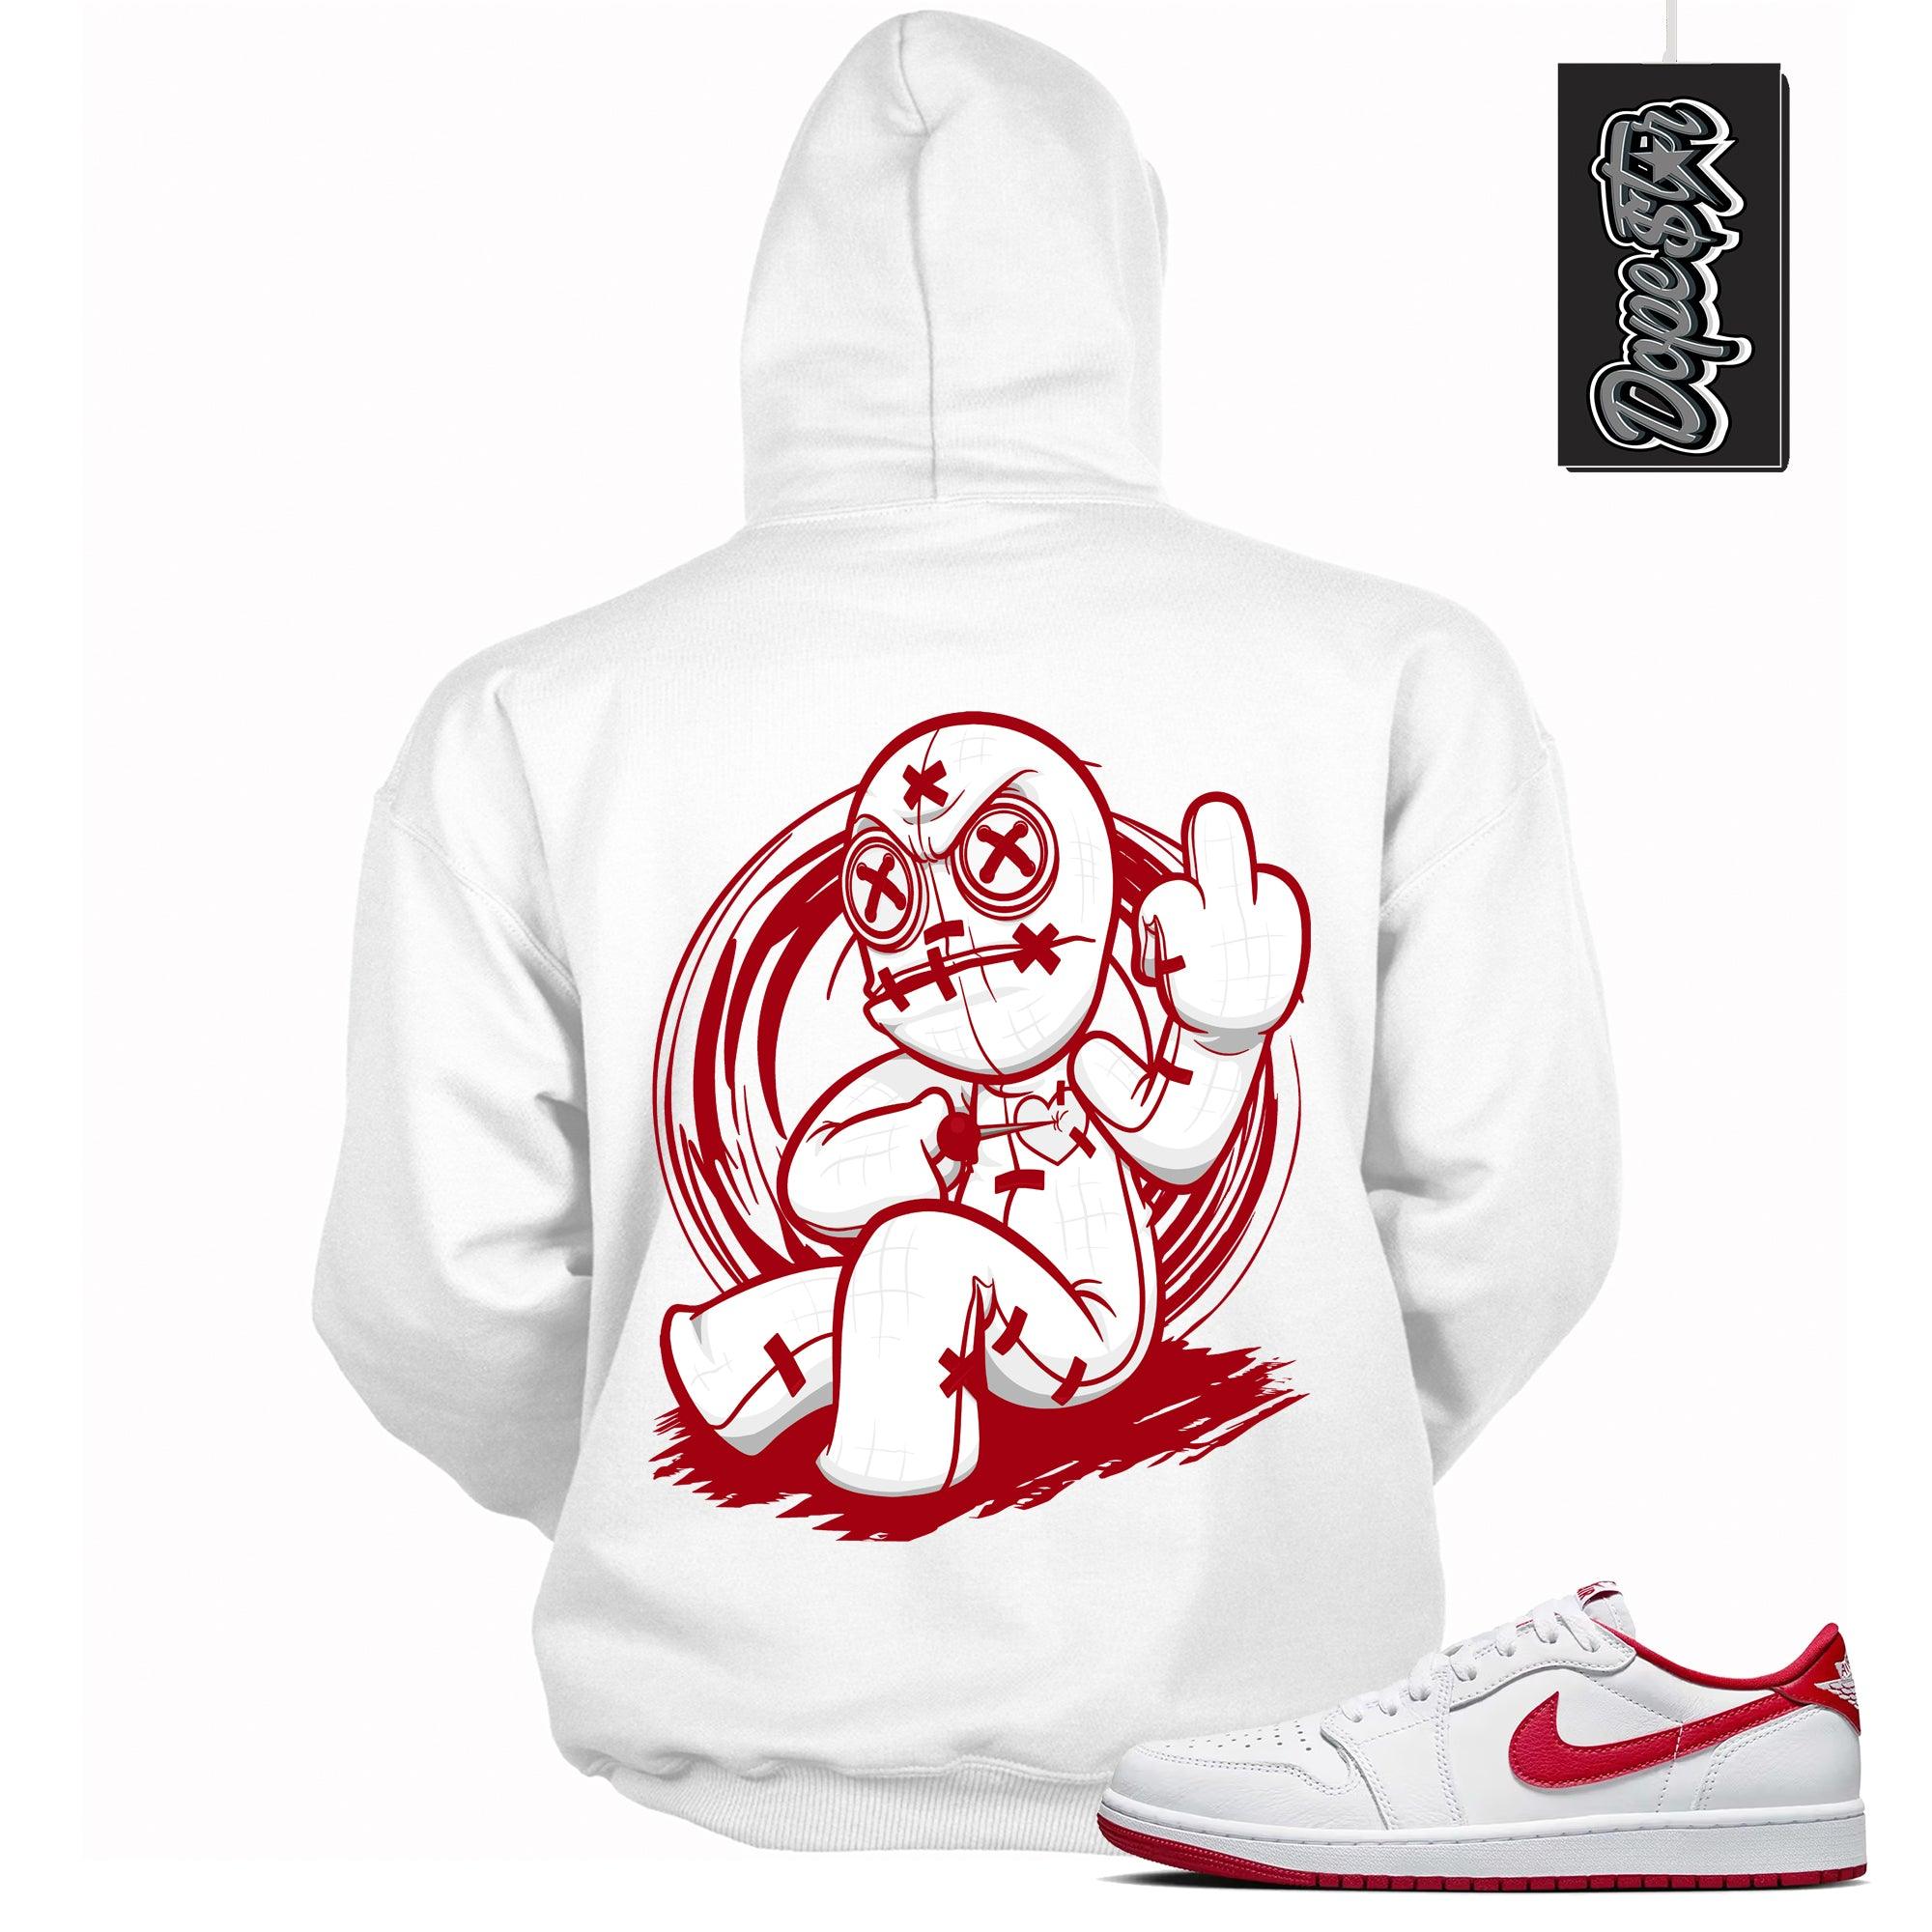 Cool White Graphic Hoodie with “ VooDoo Doll “ print, that perfectly matches Air Jordan 1 Retro Low OG University Red and white sneakers